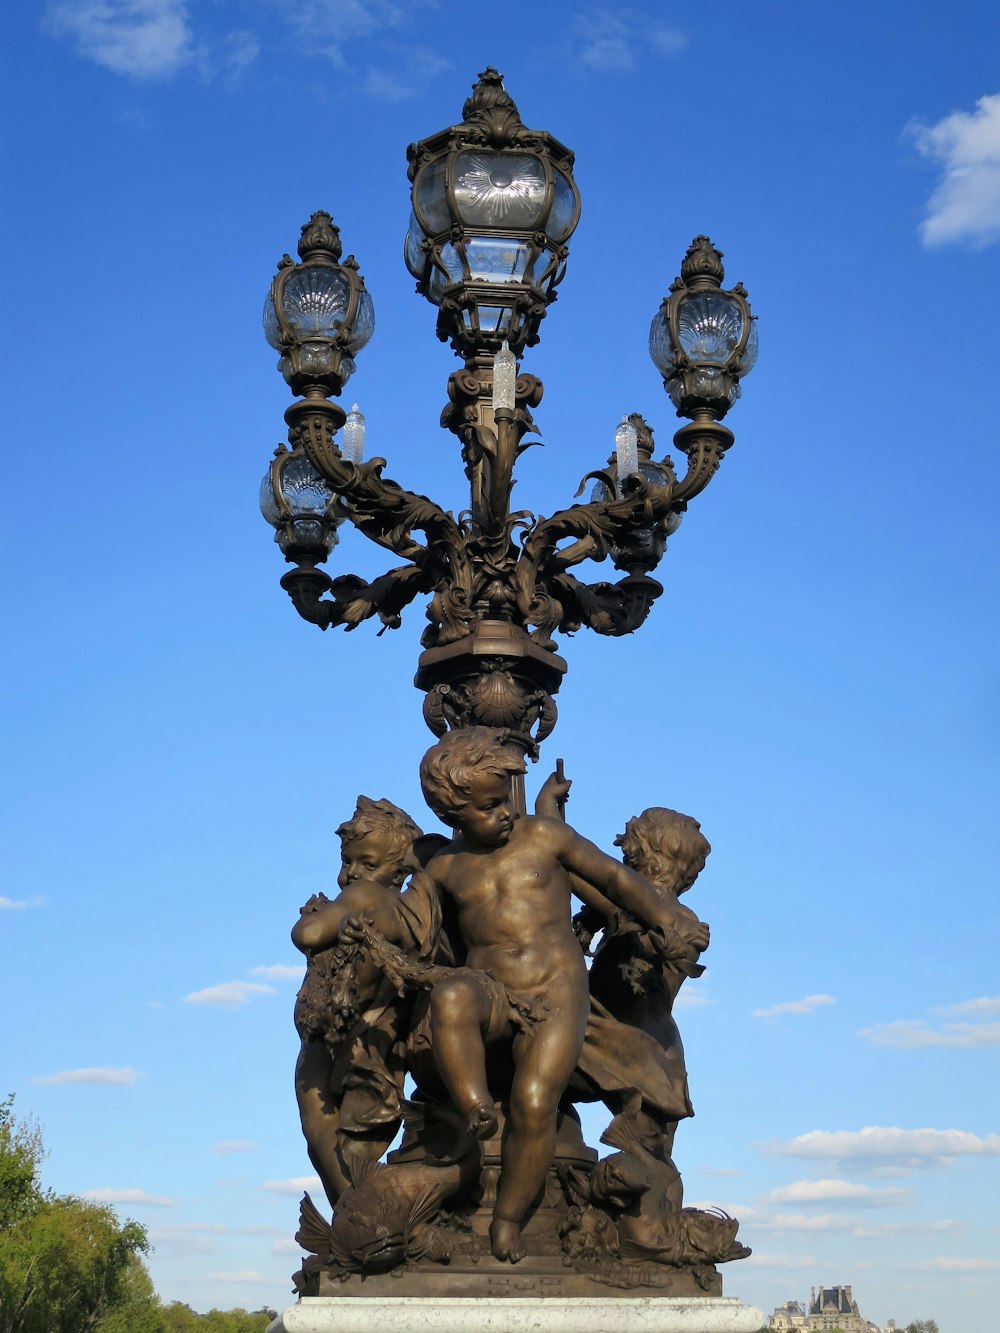 a statue of a boy holding a lamp post